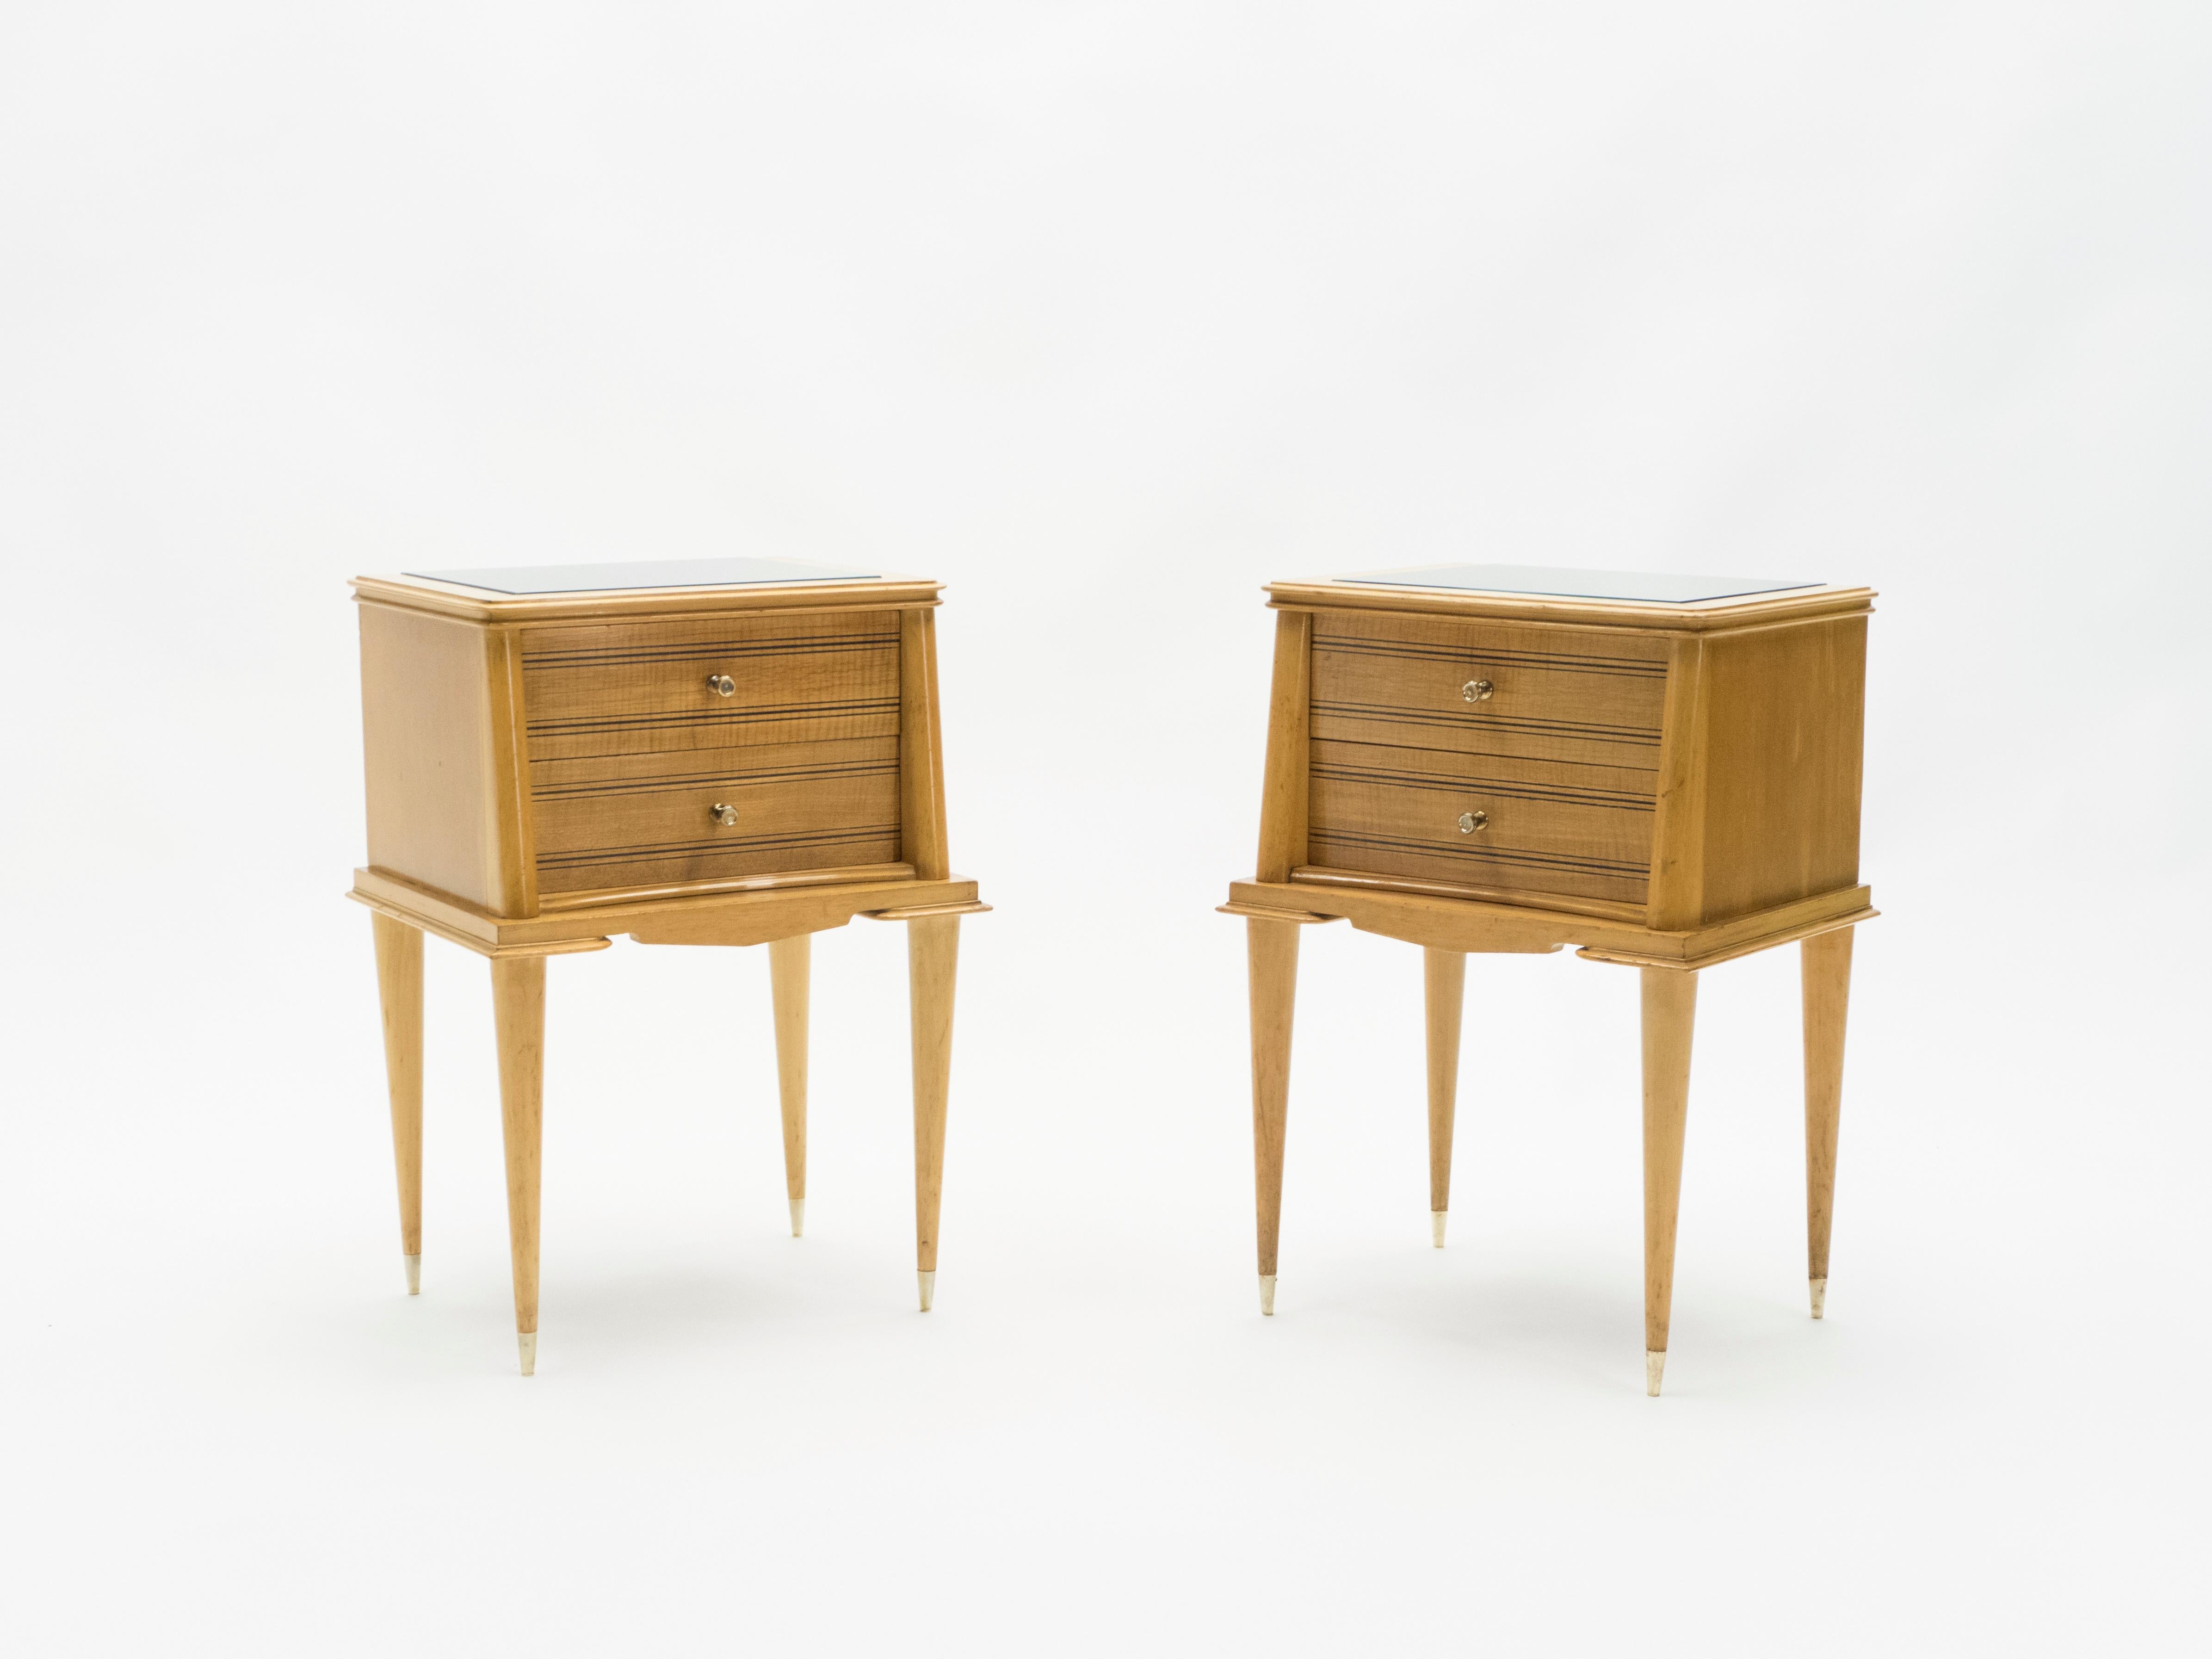 French Sycamore Nightstands 2 Drawers Attributed to Suzanne Guiguichon, 1950s For Sale 10